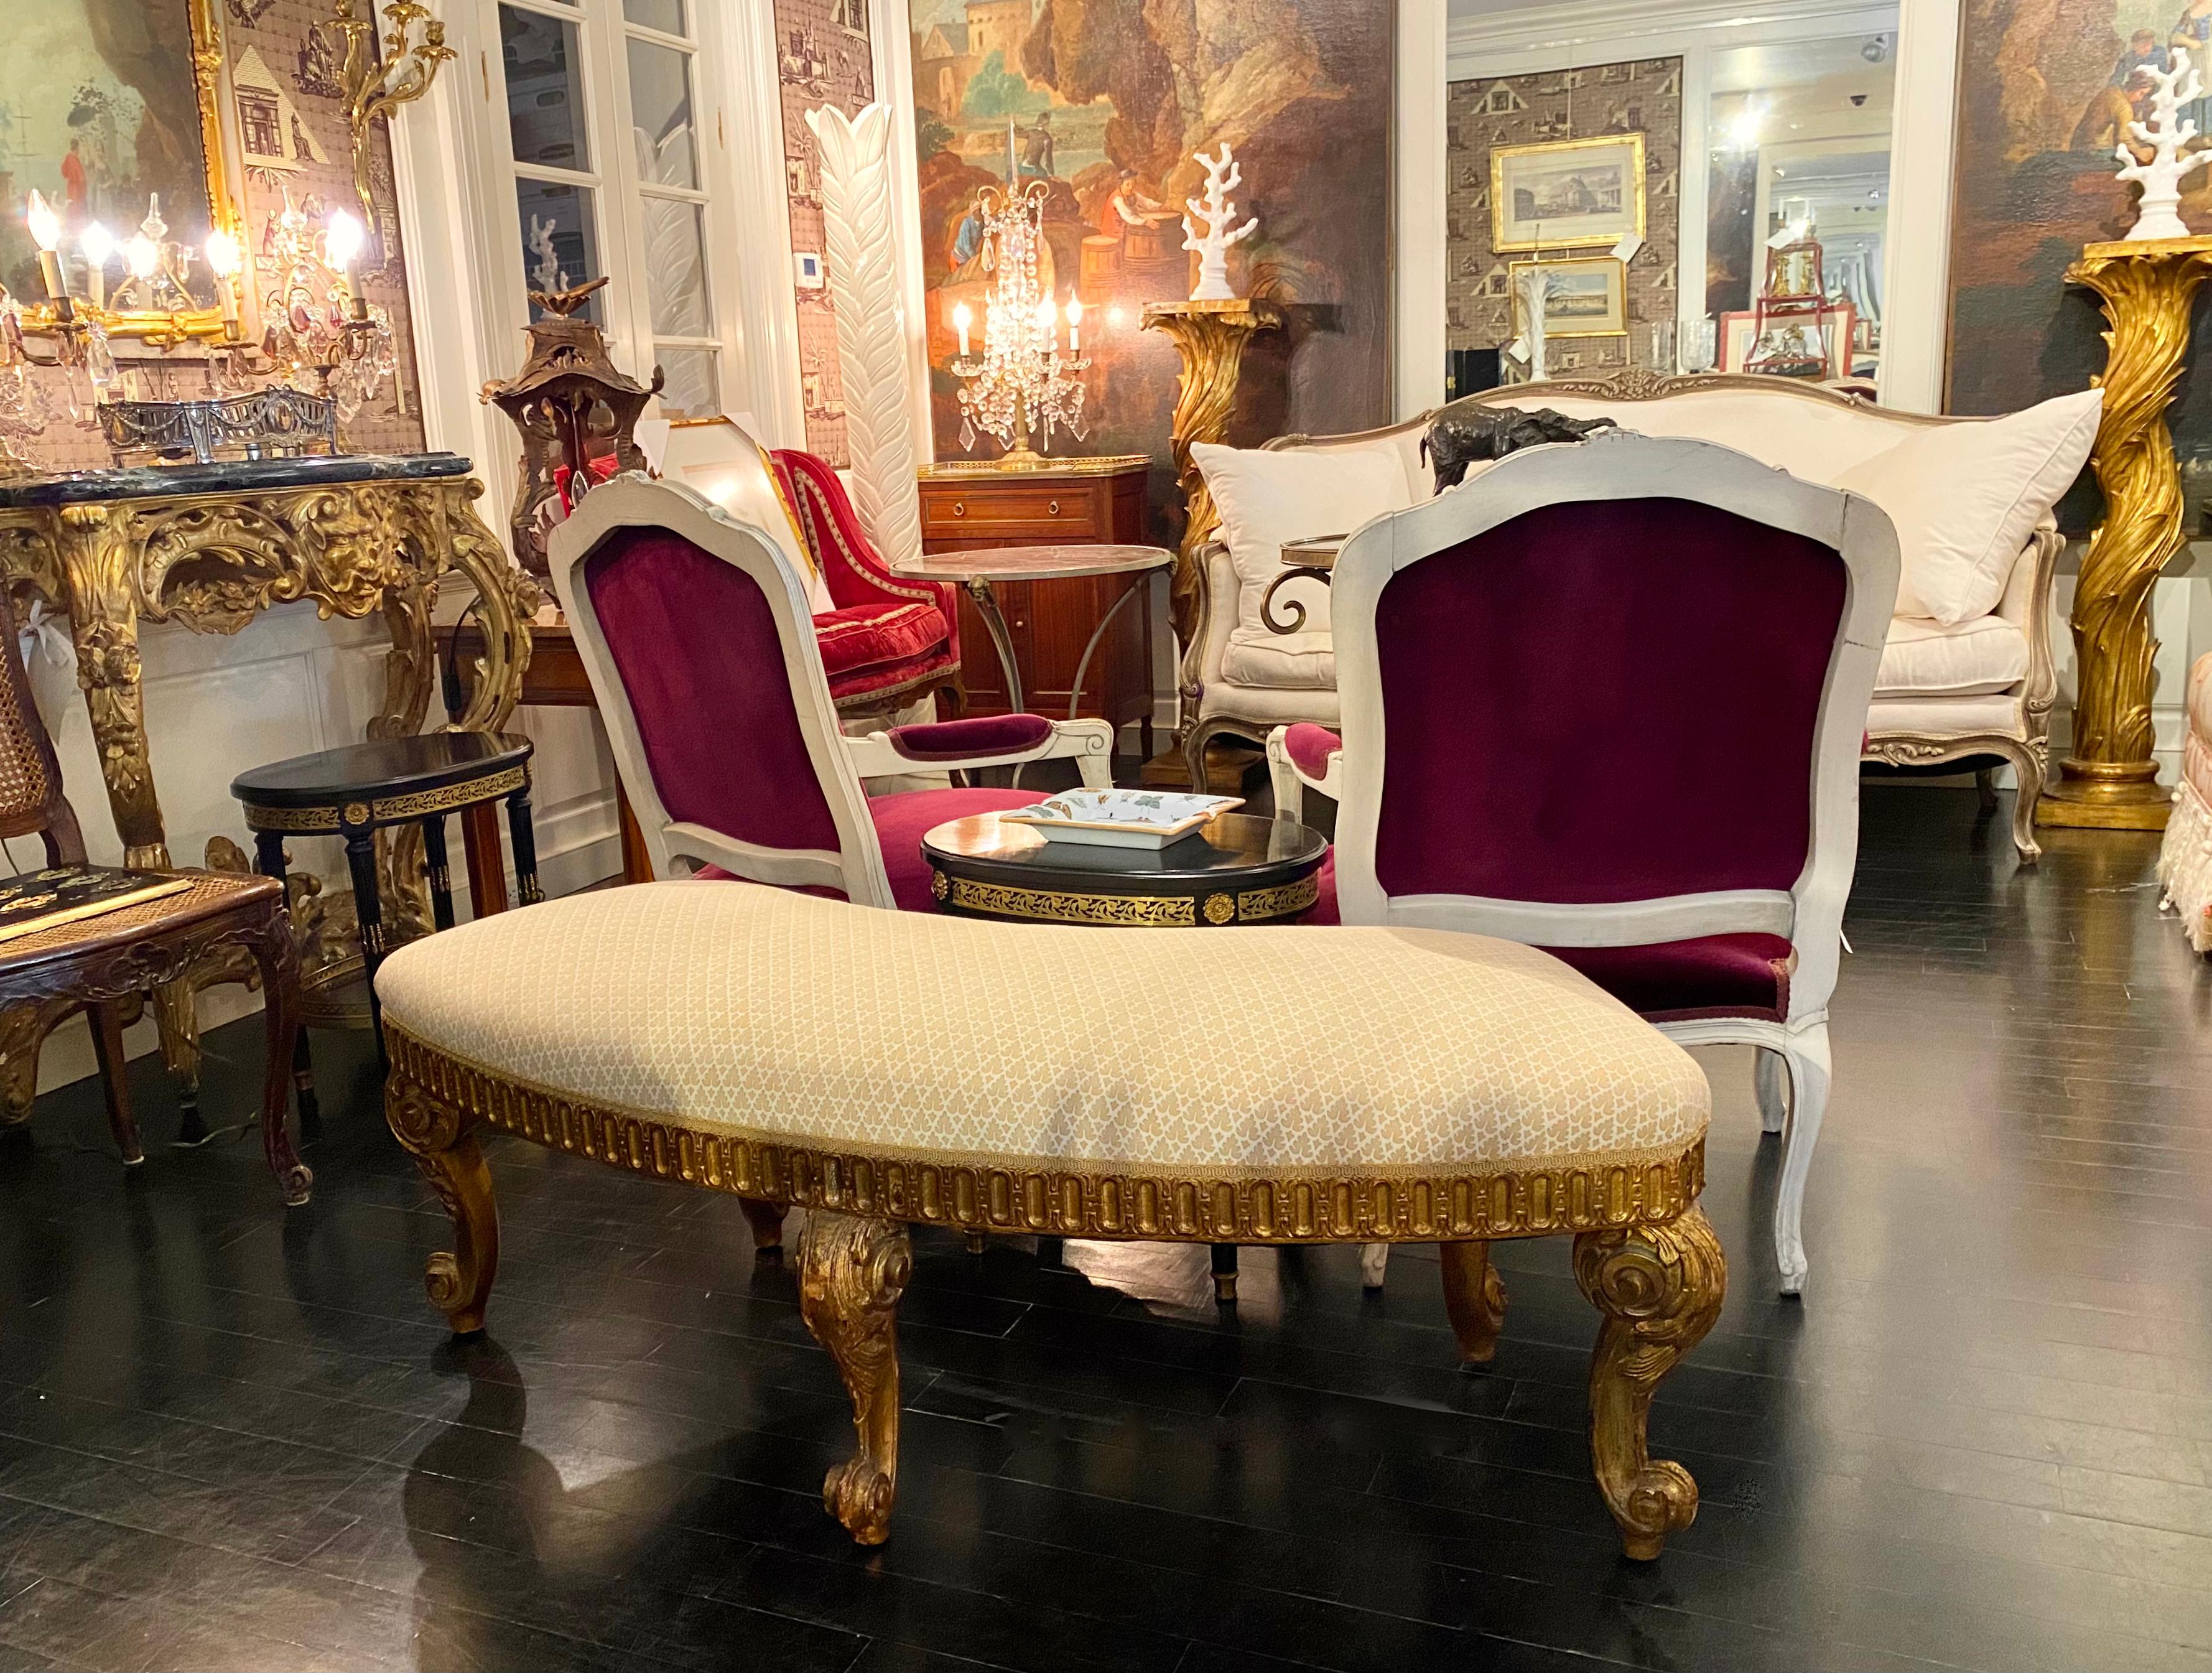 French Louis XVI Style Giltwood Semi-Circular bench, Model inspired by Georges Jacob.

Resting of giltwood legs carved in the neo-classical vernacular mastered by Georges Jacob, magnificent carved details. The seat edge is also richly sculpted.